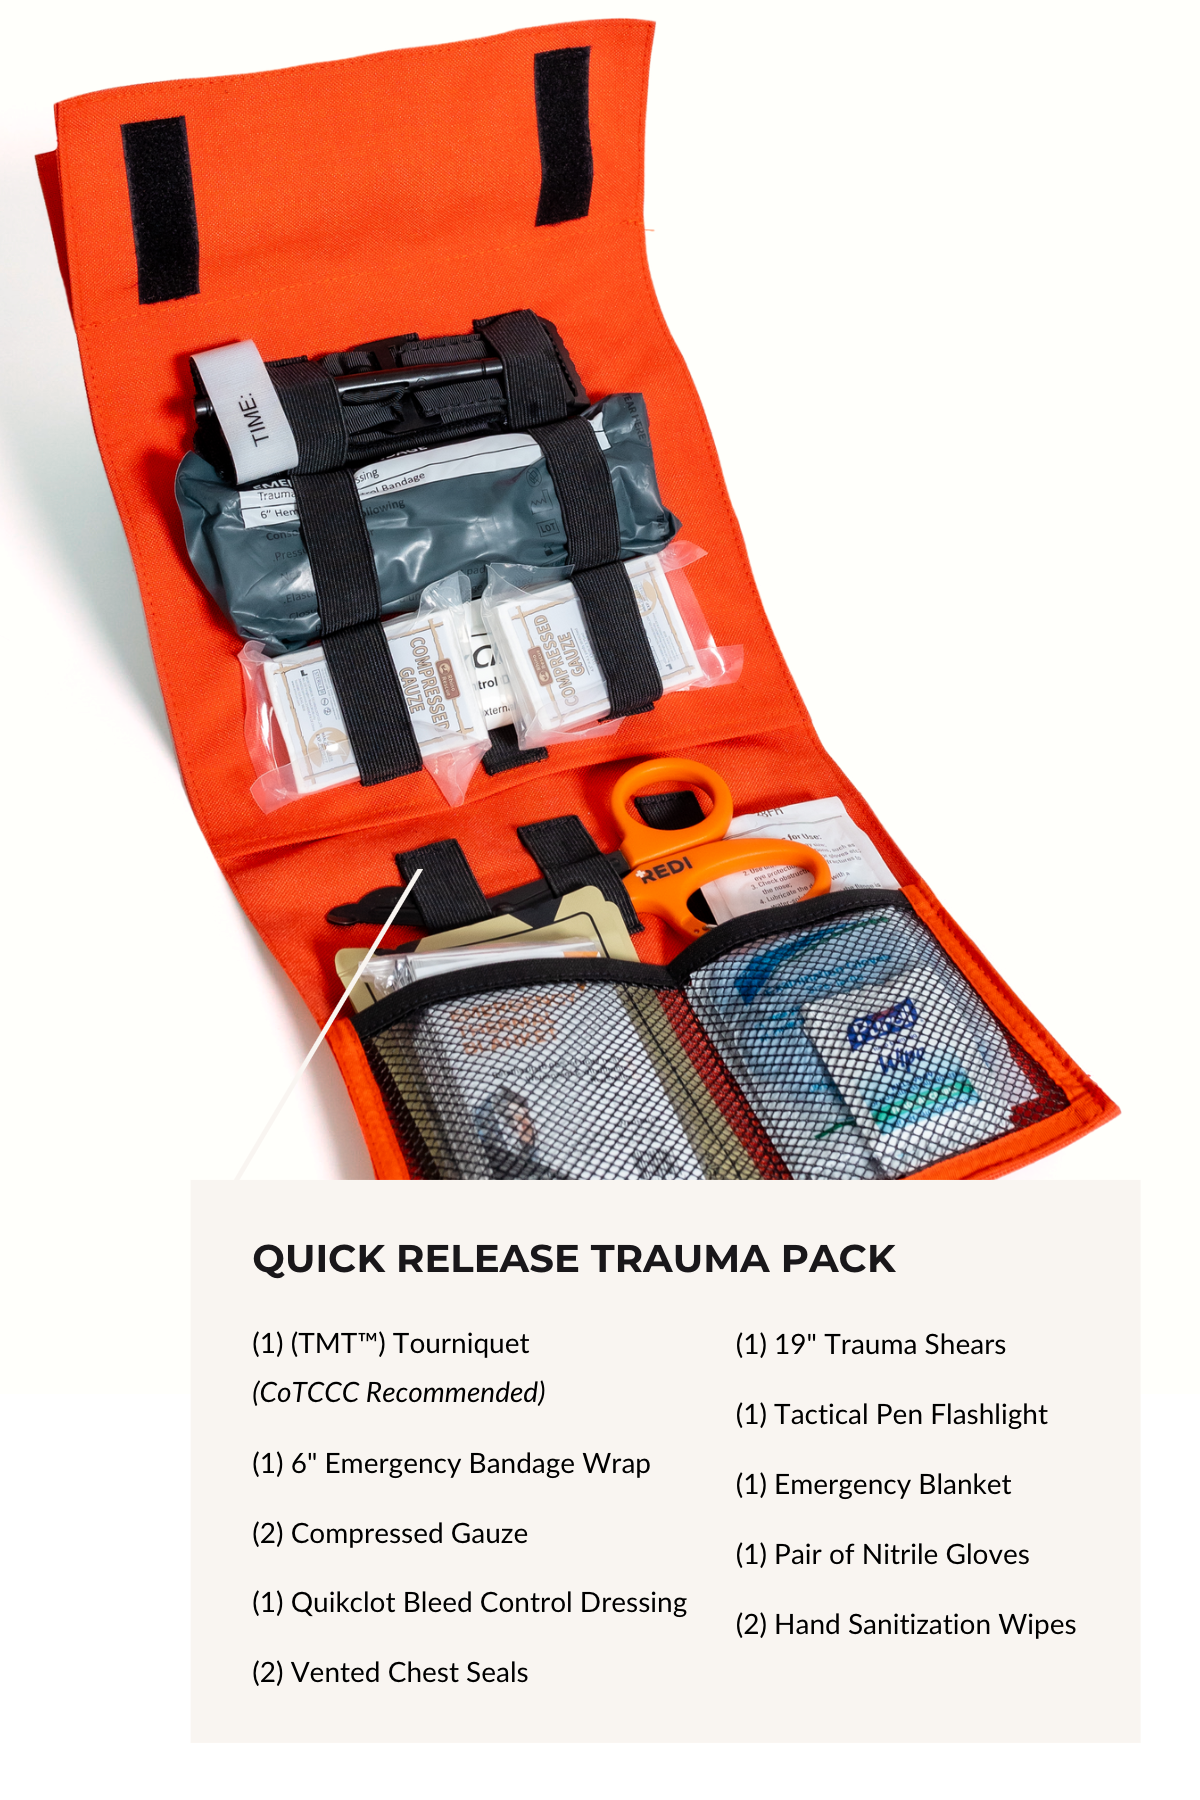 Contents inside the quick release trauma pack, which includes a list of blood hemorrhaging supplies used to treat critical, life threatening wounds 